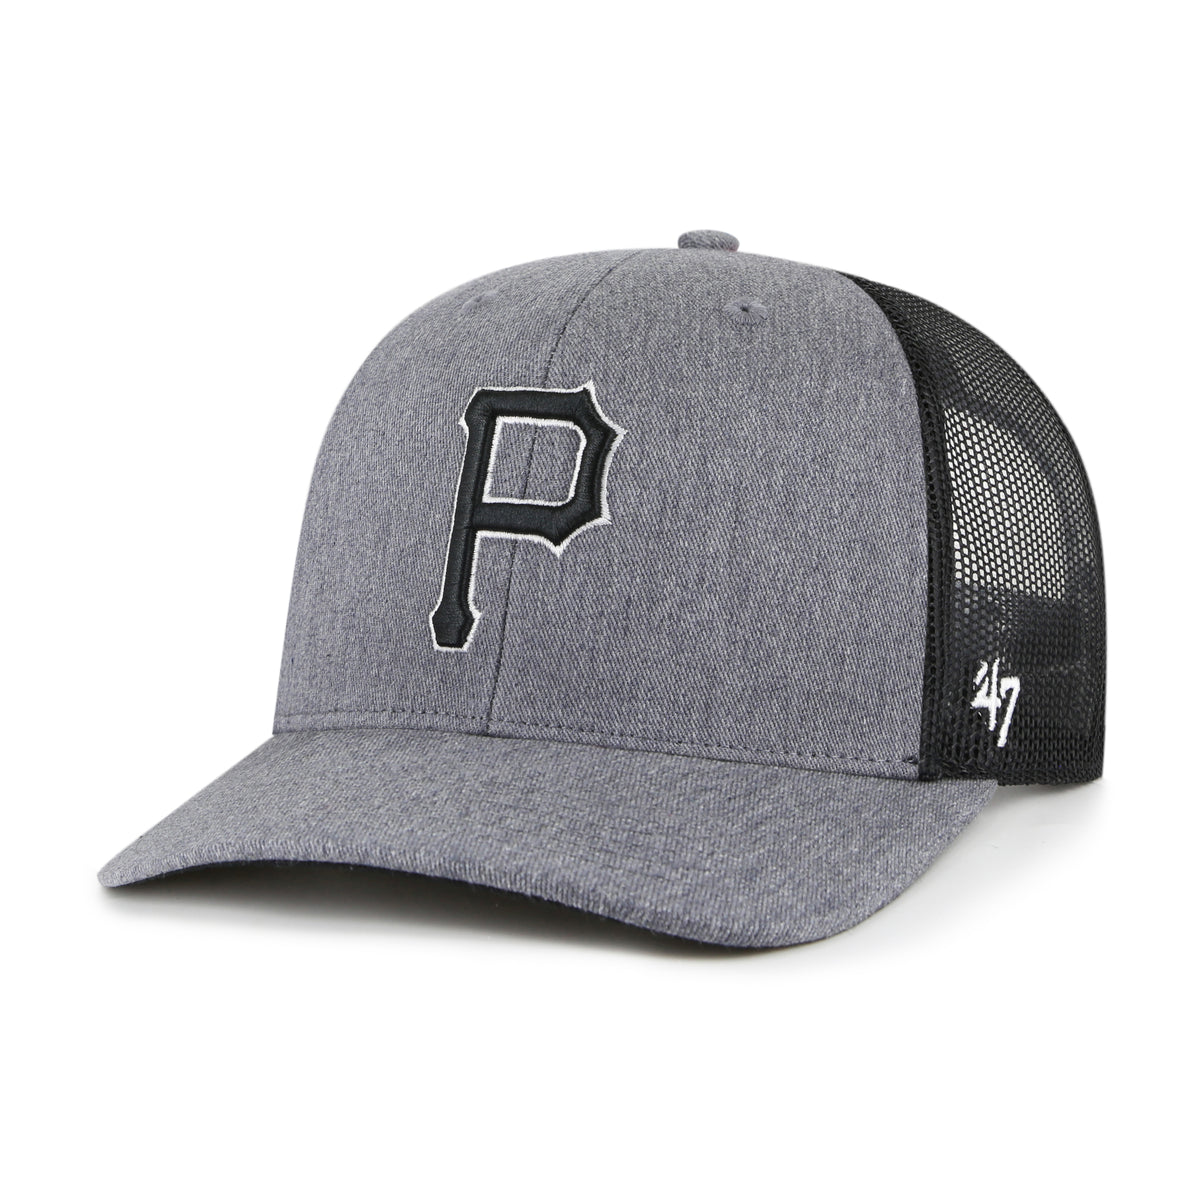 PITTSBURGH PIRATES CARBON '47 TRUCKER